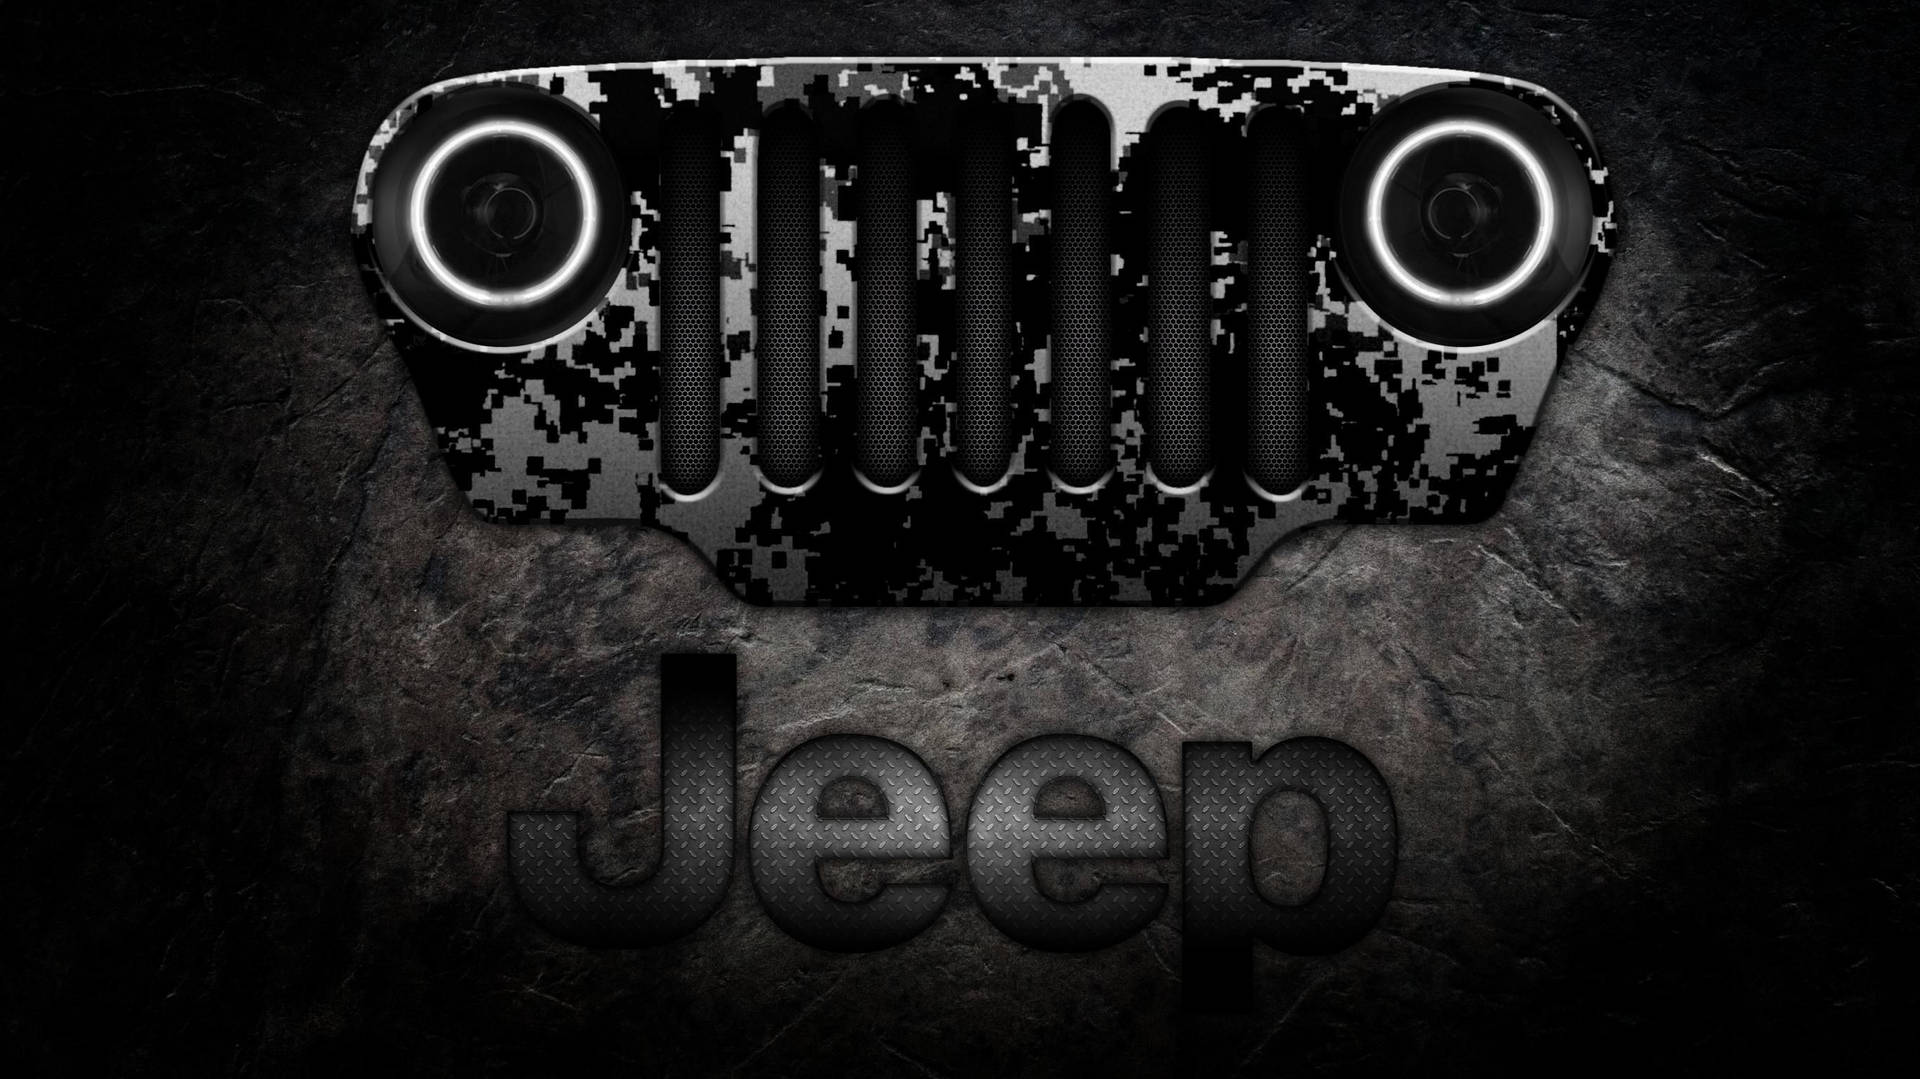 Majestic Black Jeep Wrangler with Camouflage Grill Wallpaper